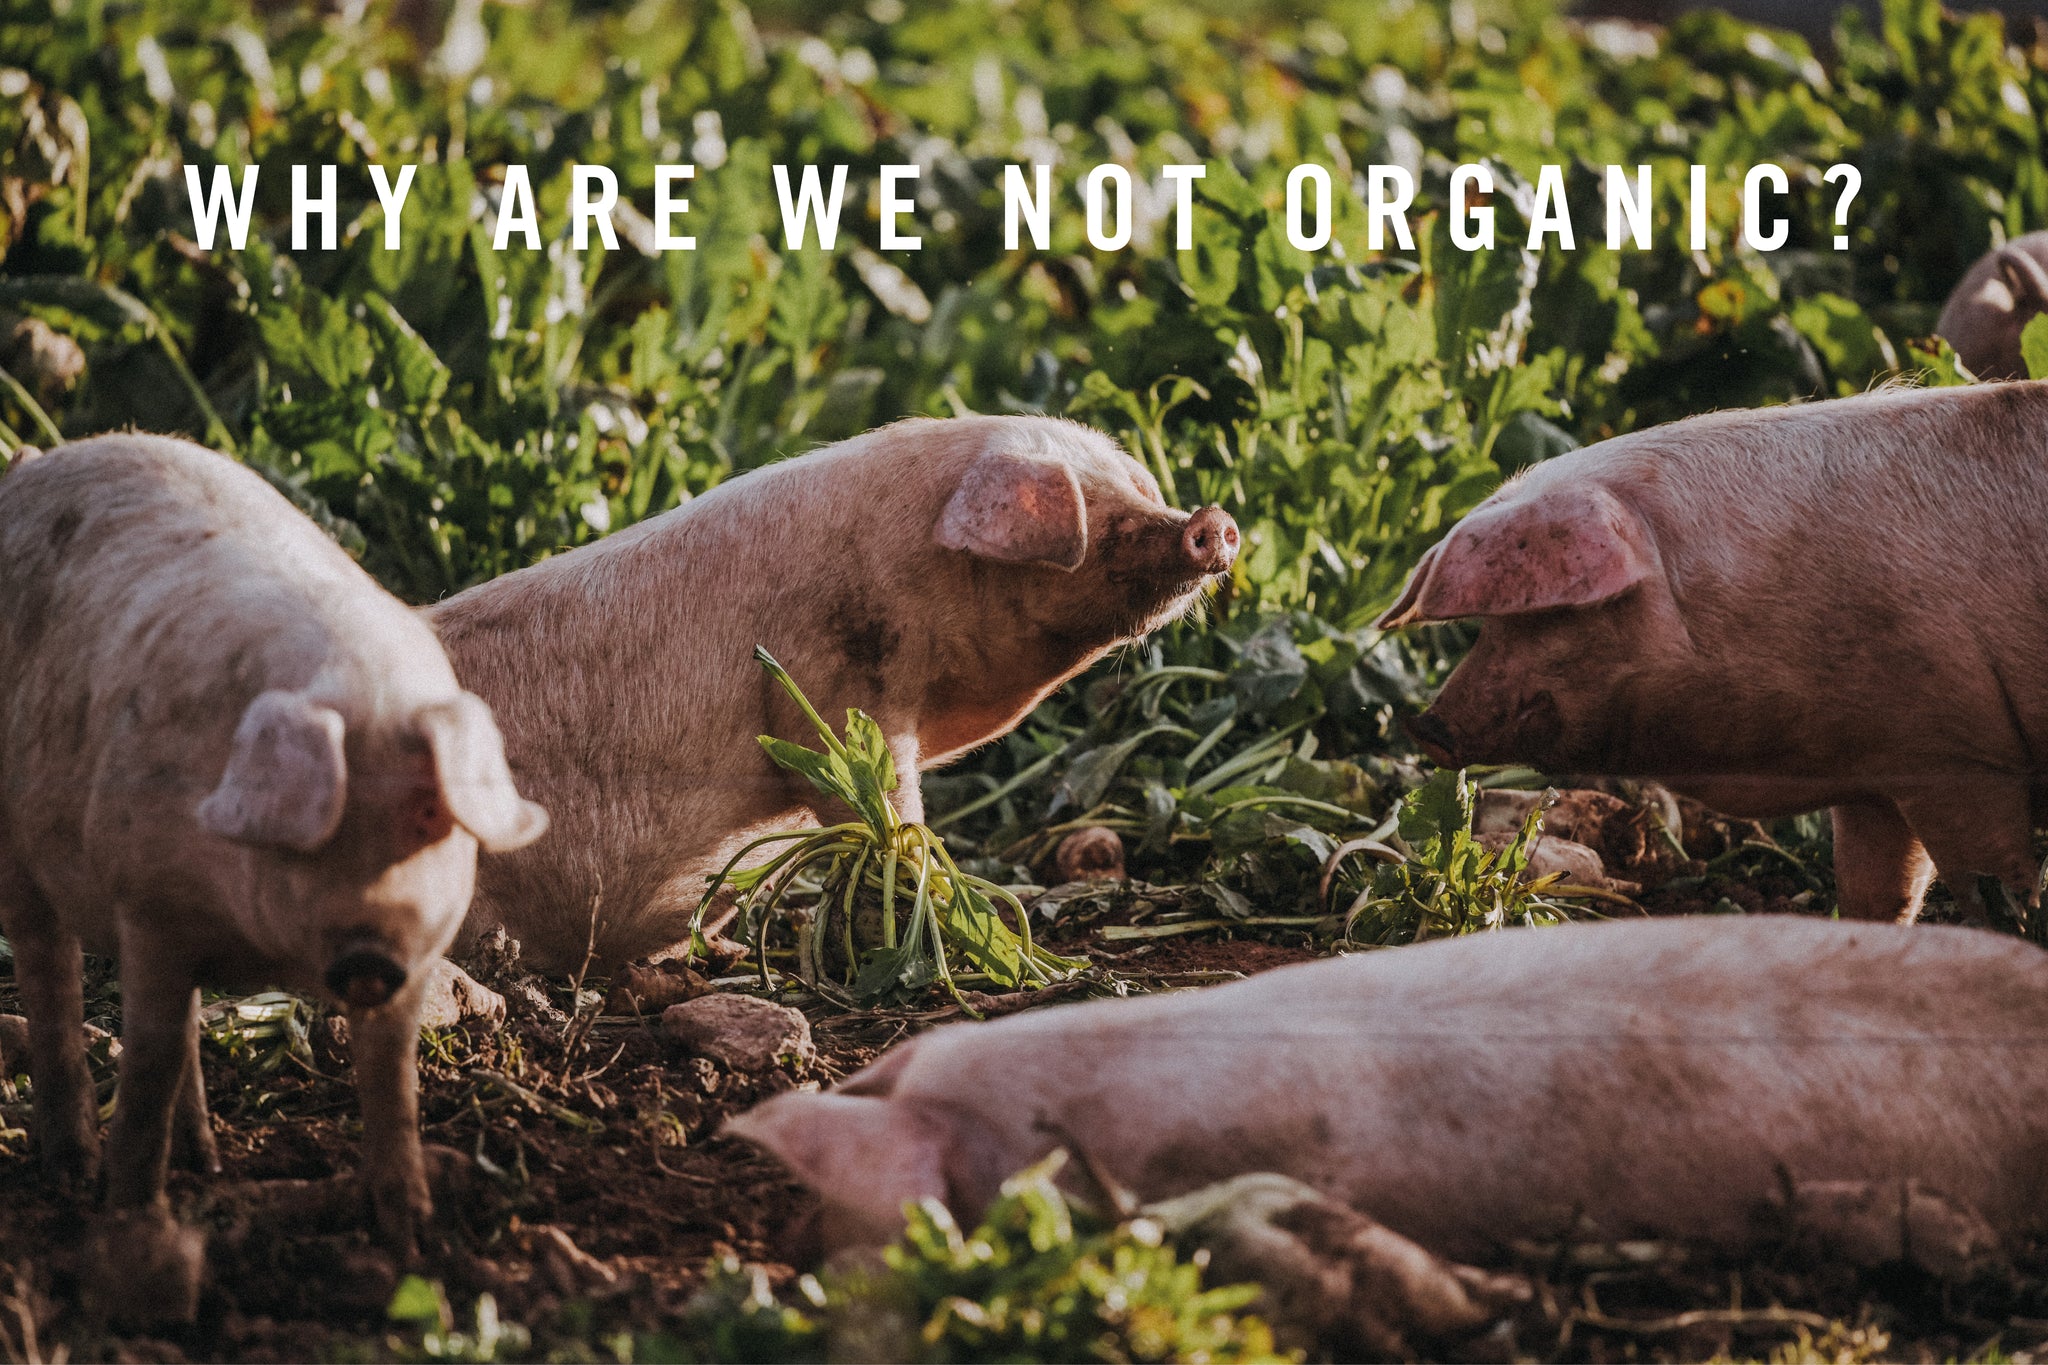 Why are we not organic?